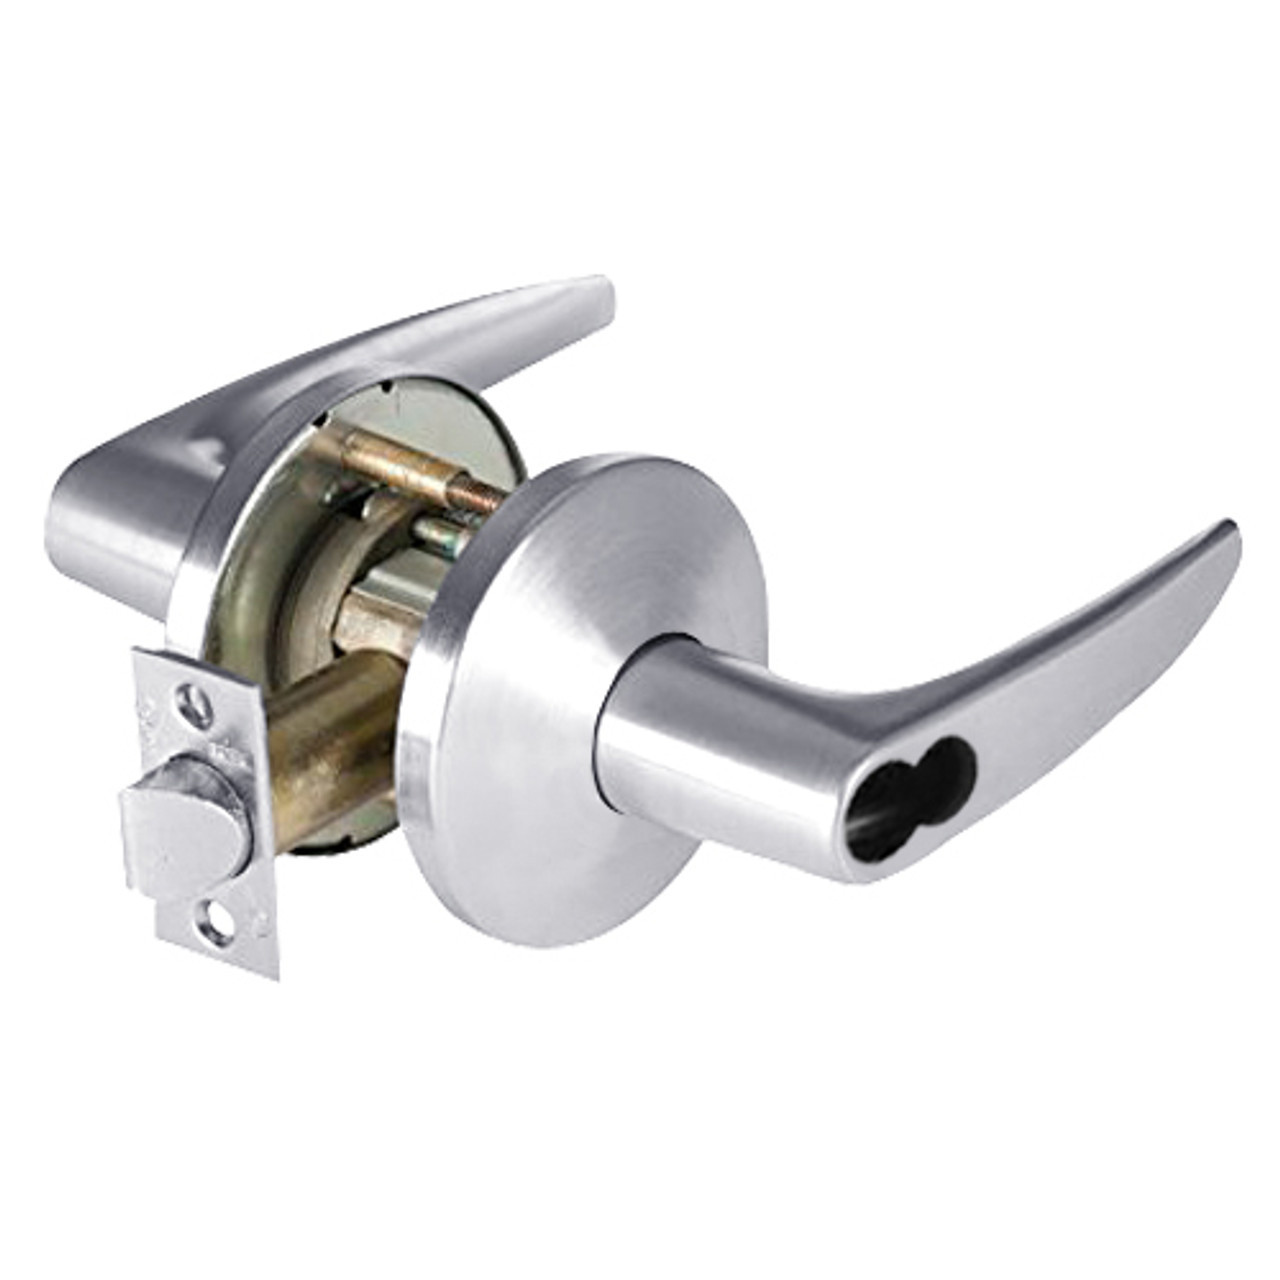 9K37AB16LS3625LM Best 9K Series Entrance Cylindrical Lever Locks with Curved without Return Lever Design Accept 7 Pin Best Core in Bright Chrome